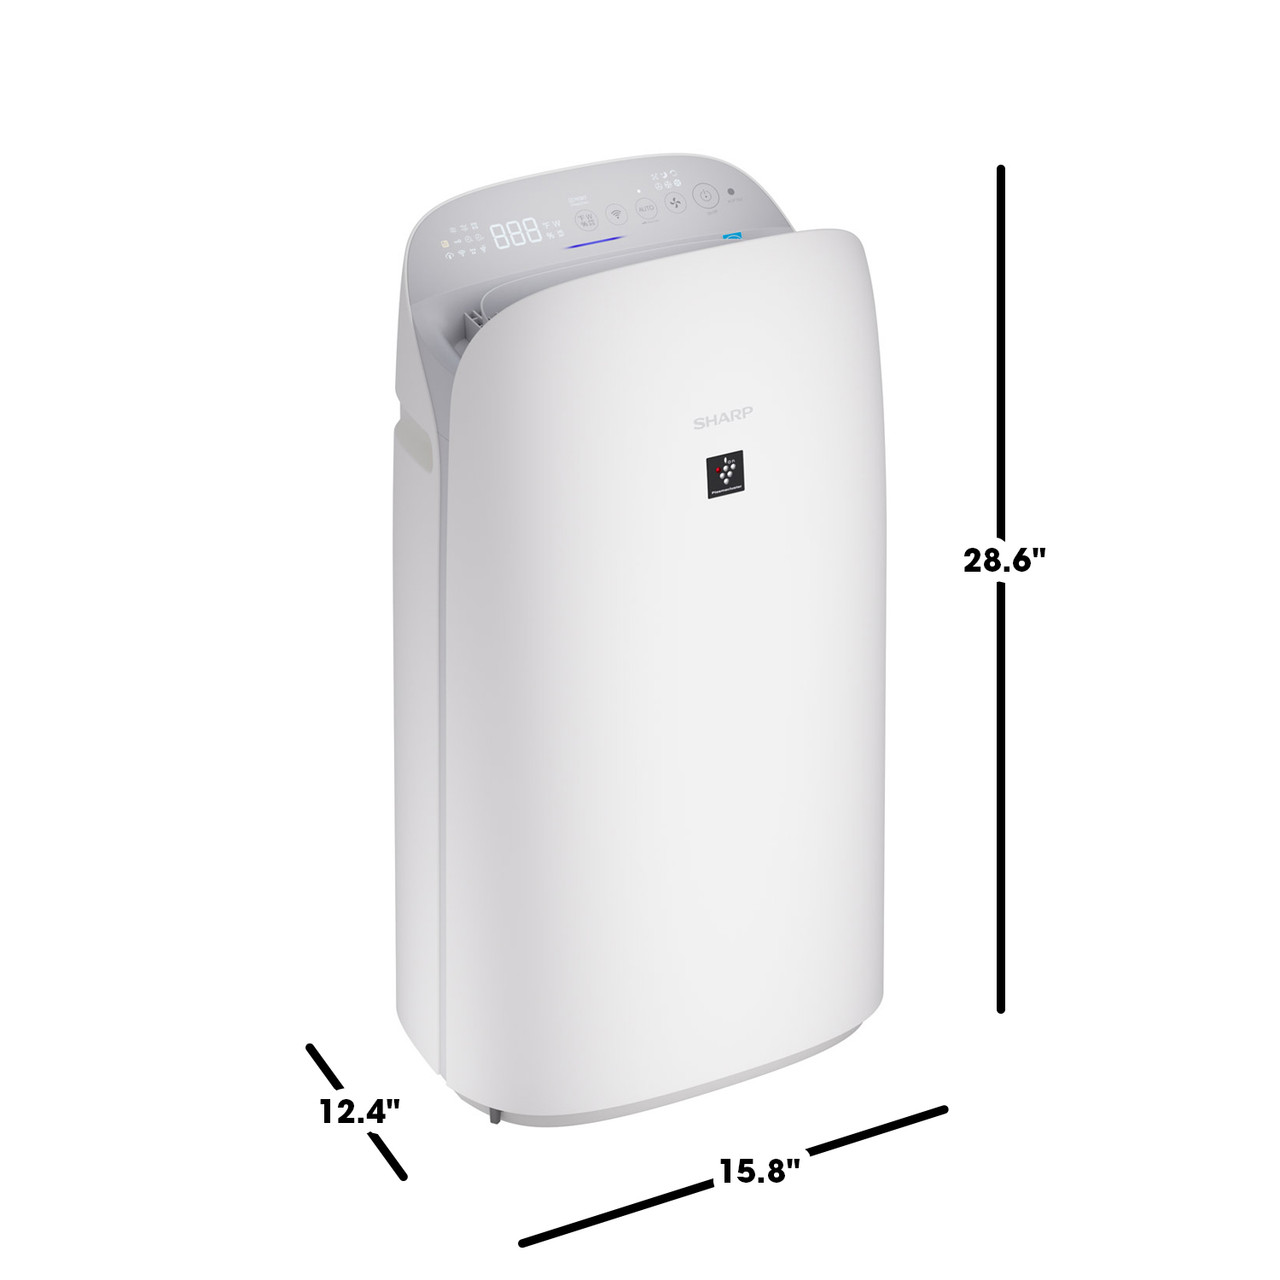 Sharp Plasmacluster Ion Air Purifier with True HEPA + Humidifier (KCP70UW) dimensions